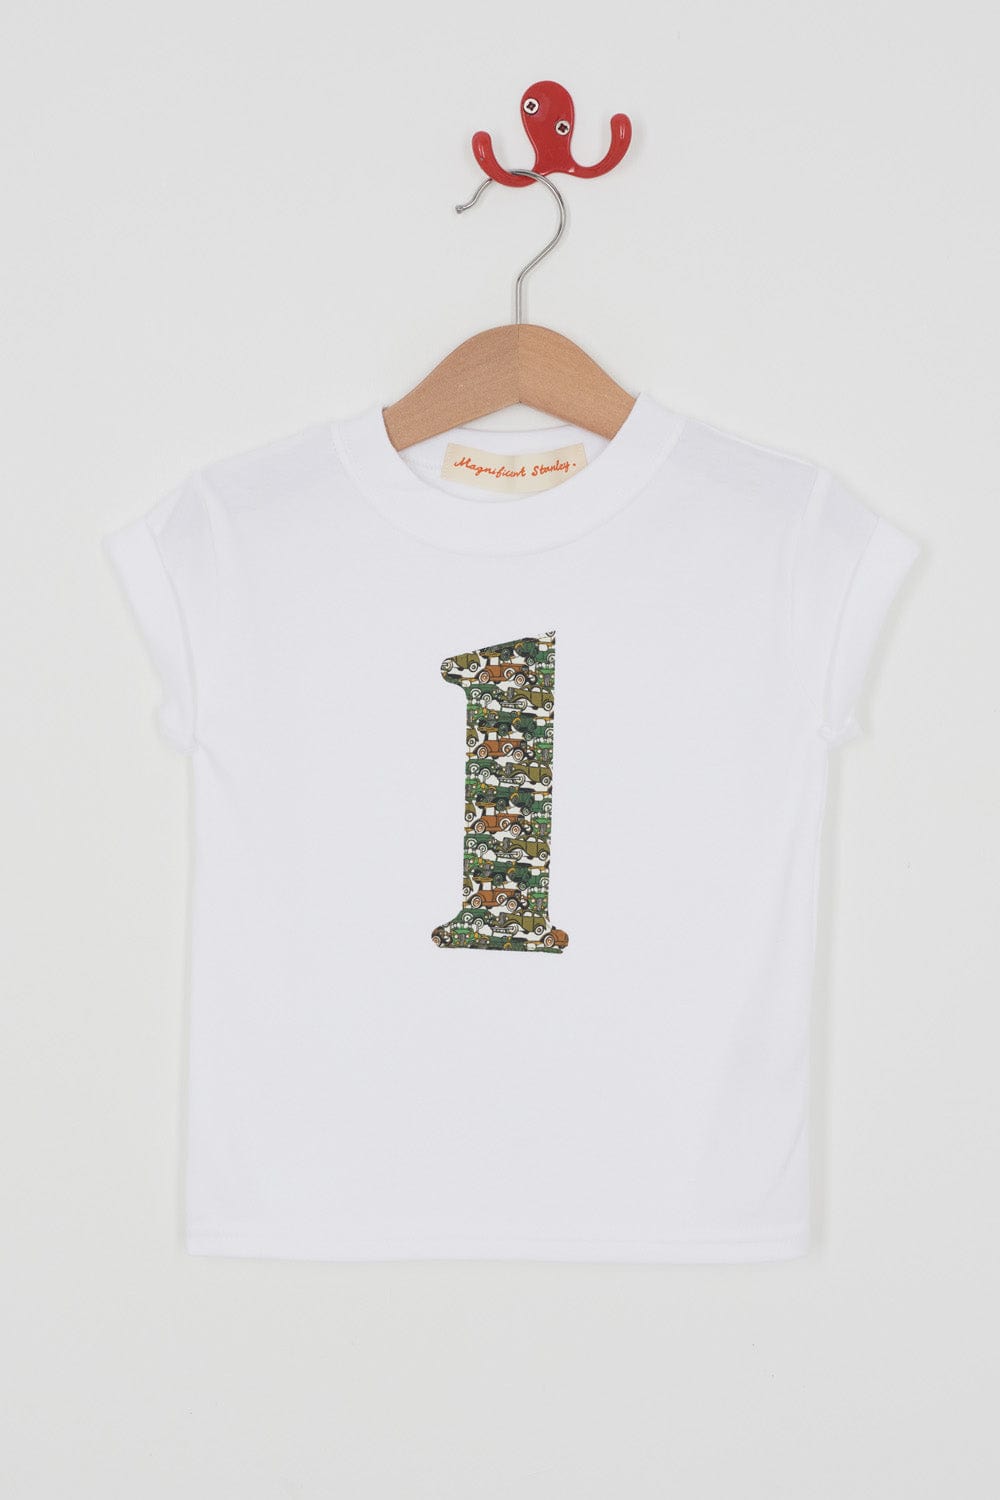 Magnificent Stanley Tee Number White T-Shirt in Roaring Wheels Liberty Print